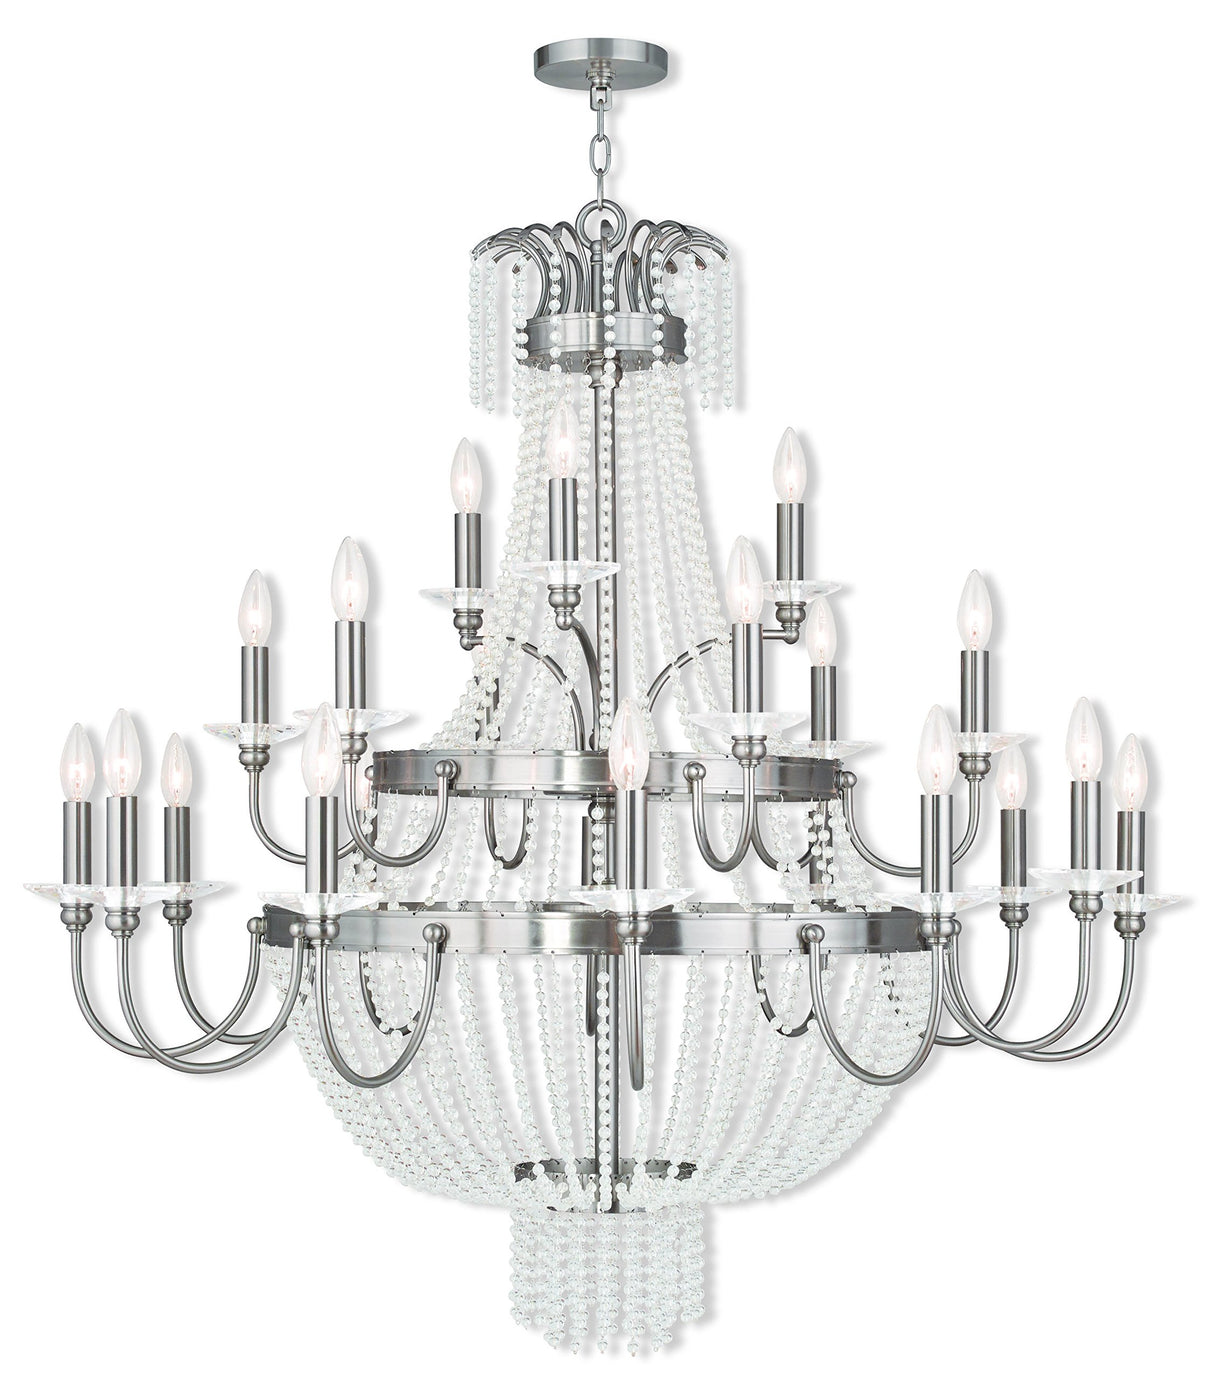 Livex Lighting 51877-91 Crystal 21 Light Foyer Chandelier from Valentina Collection in Pwt, Nckl, B/S, Slvr. Finish, Brushed Nickel